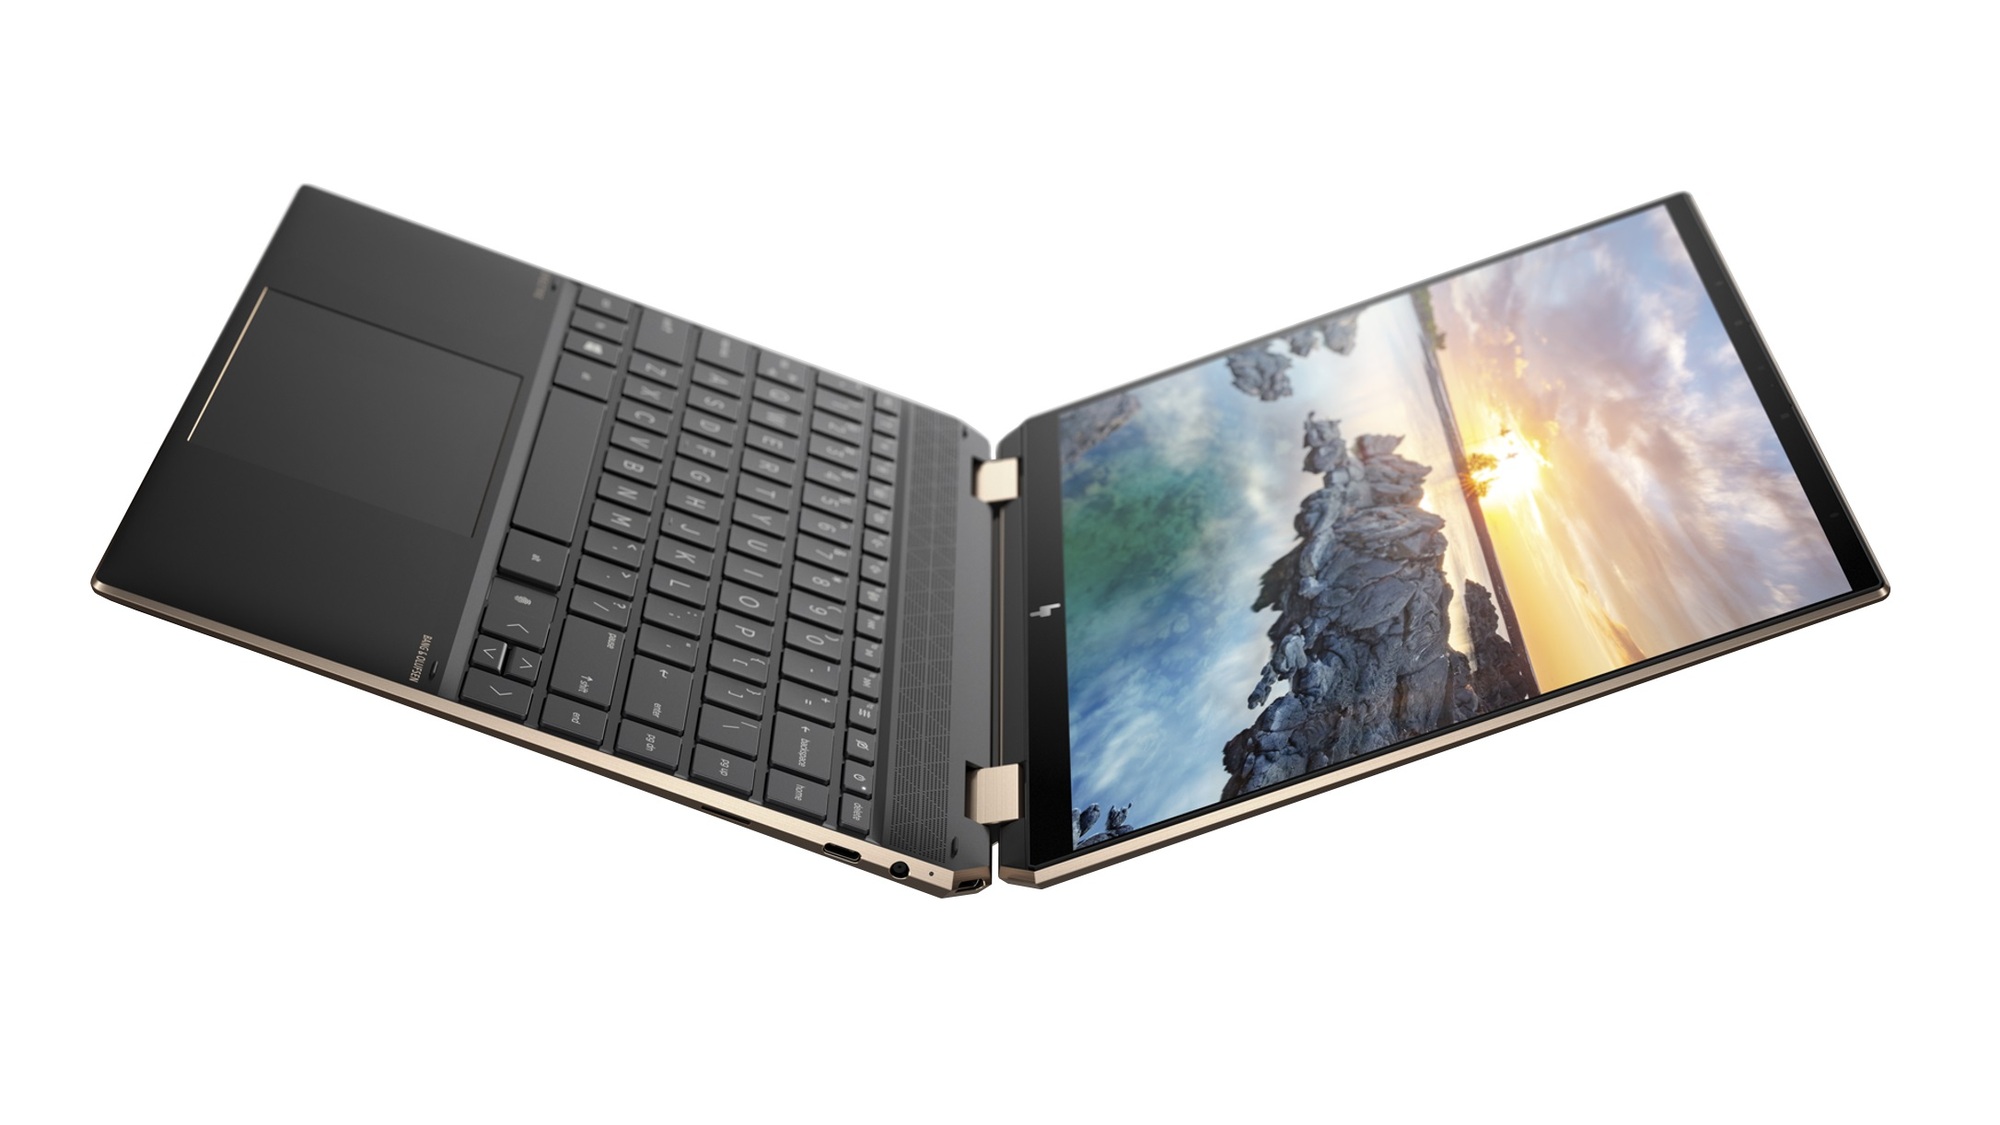 HP Spectre X360 15 inch 2020 speaker crackling occasionally on mute and any volume HP-Spectre-x360-14-taco.jpg